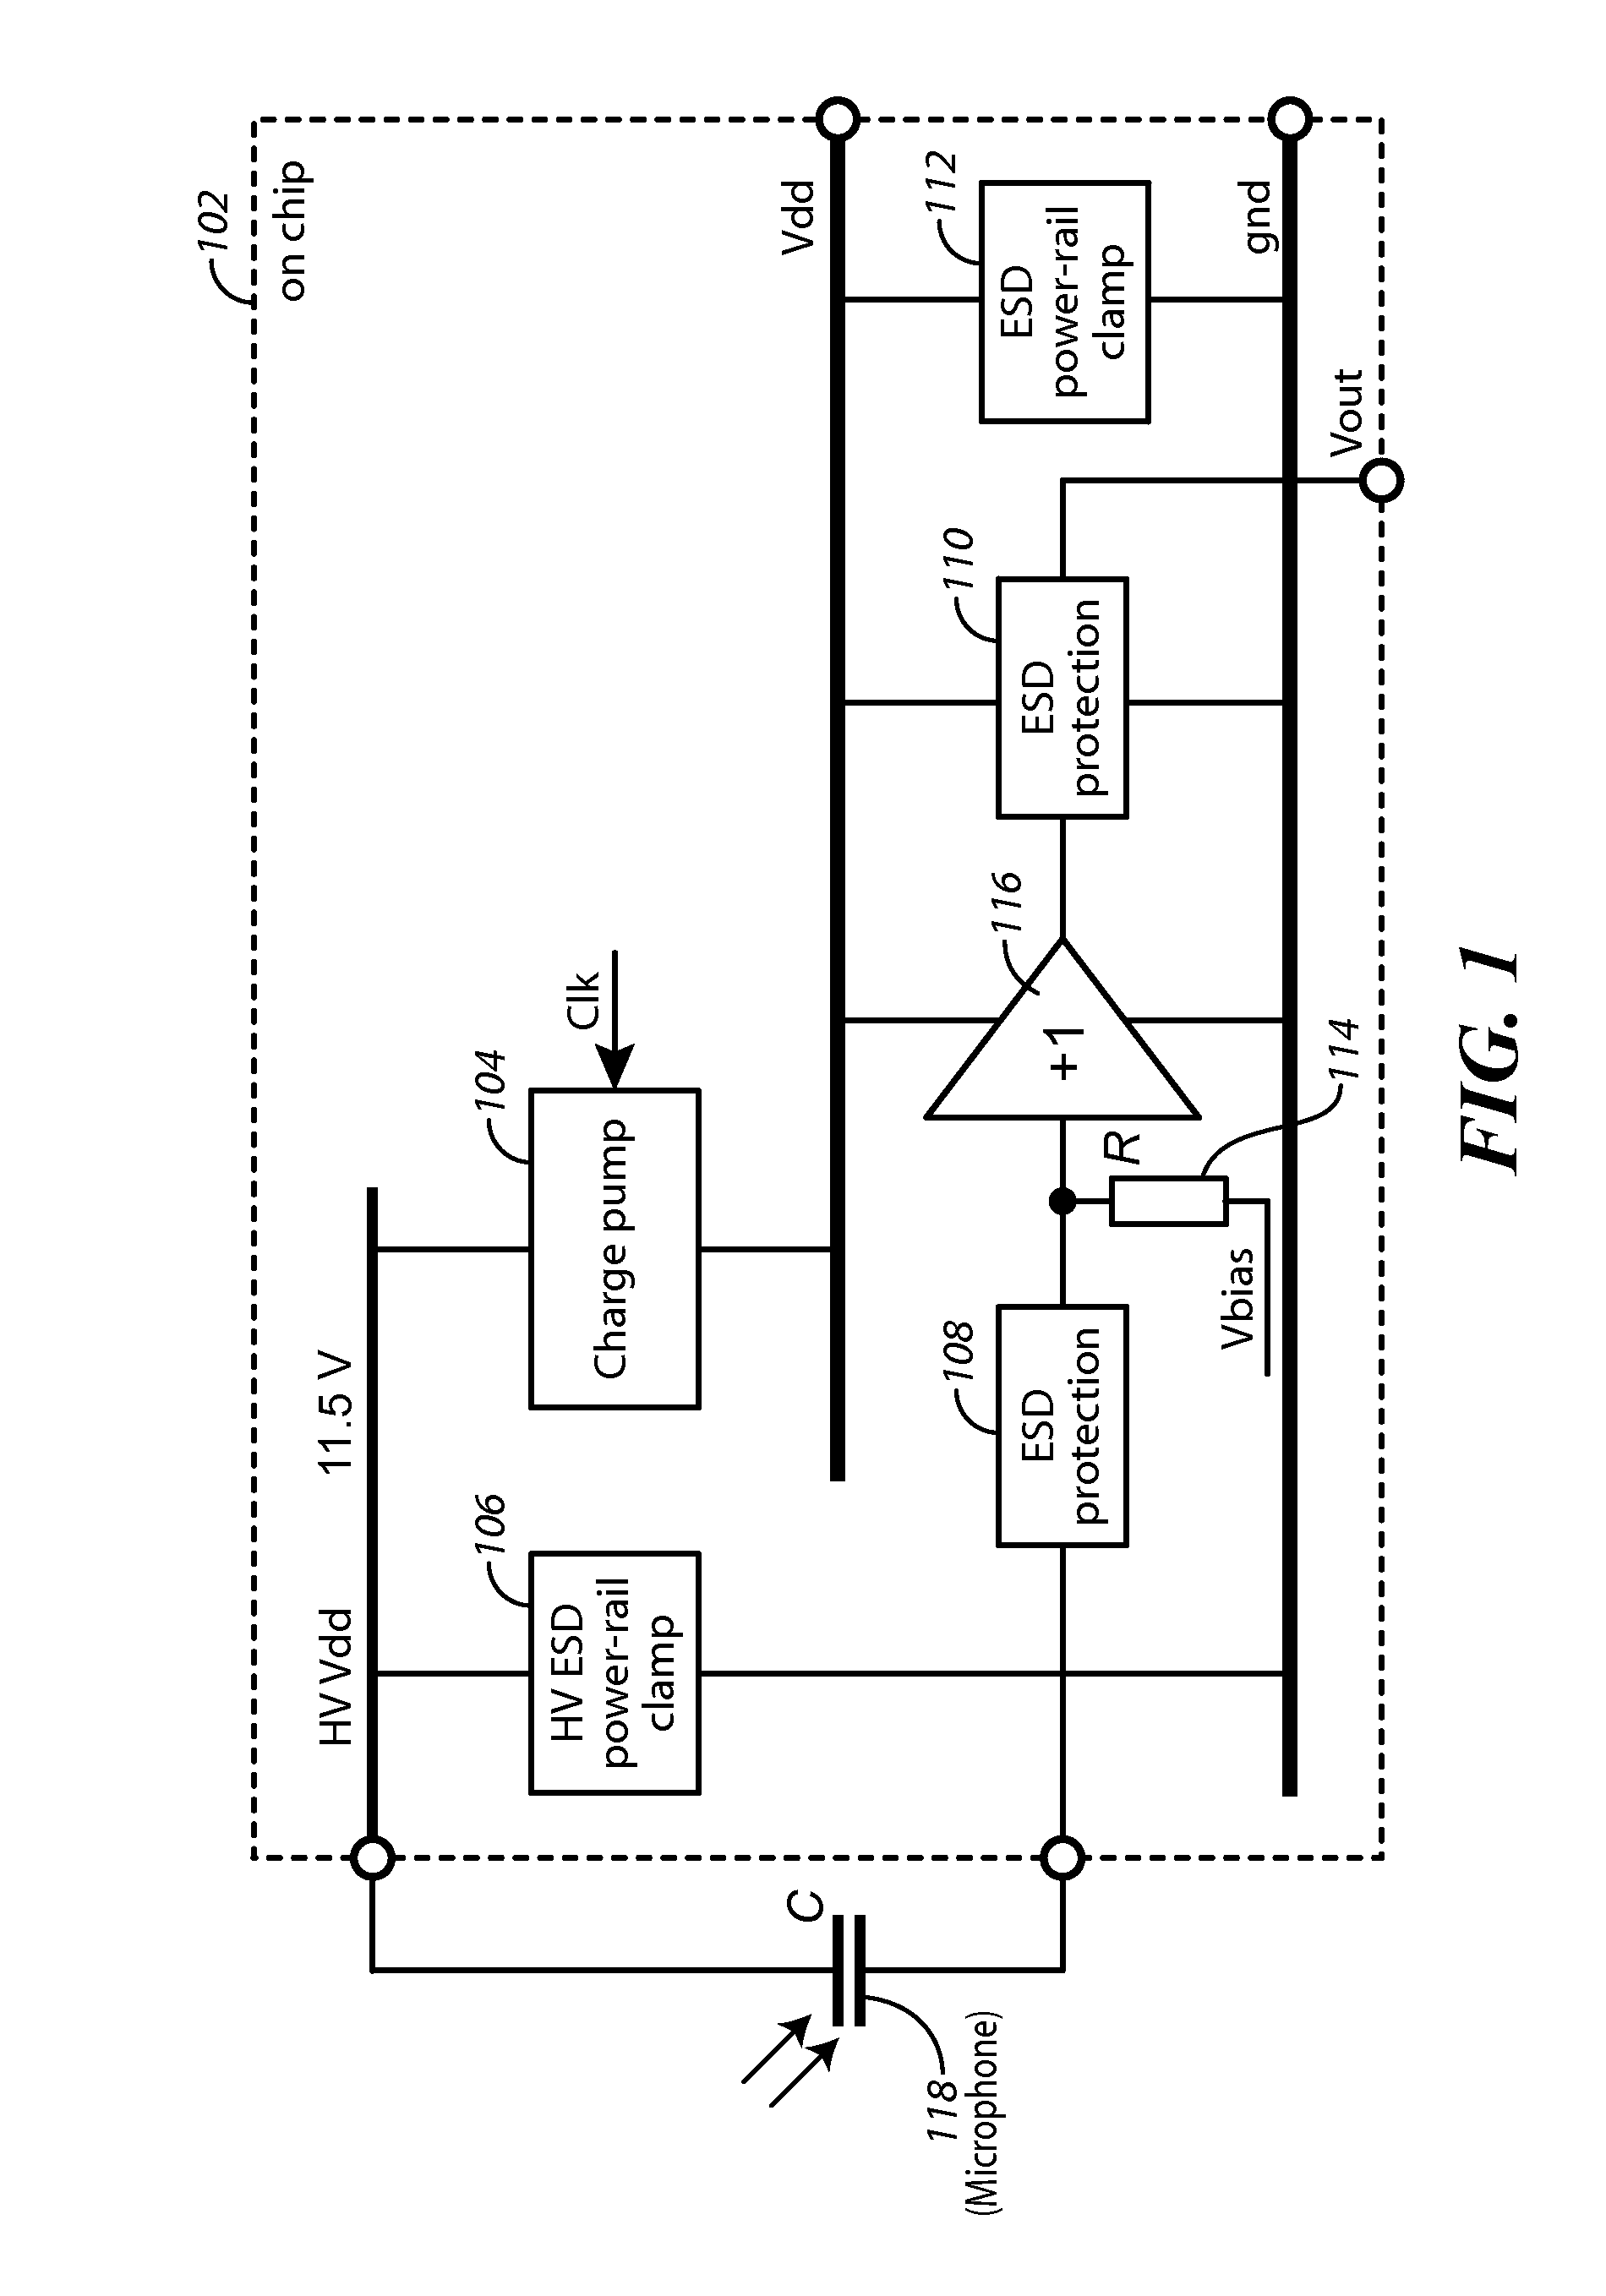 Apparatus and Method For High Voltage I/O Electro-Static Discharge Protection